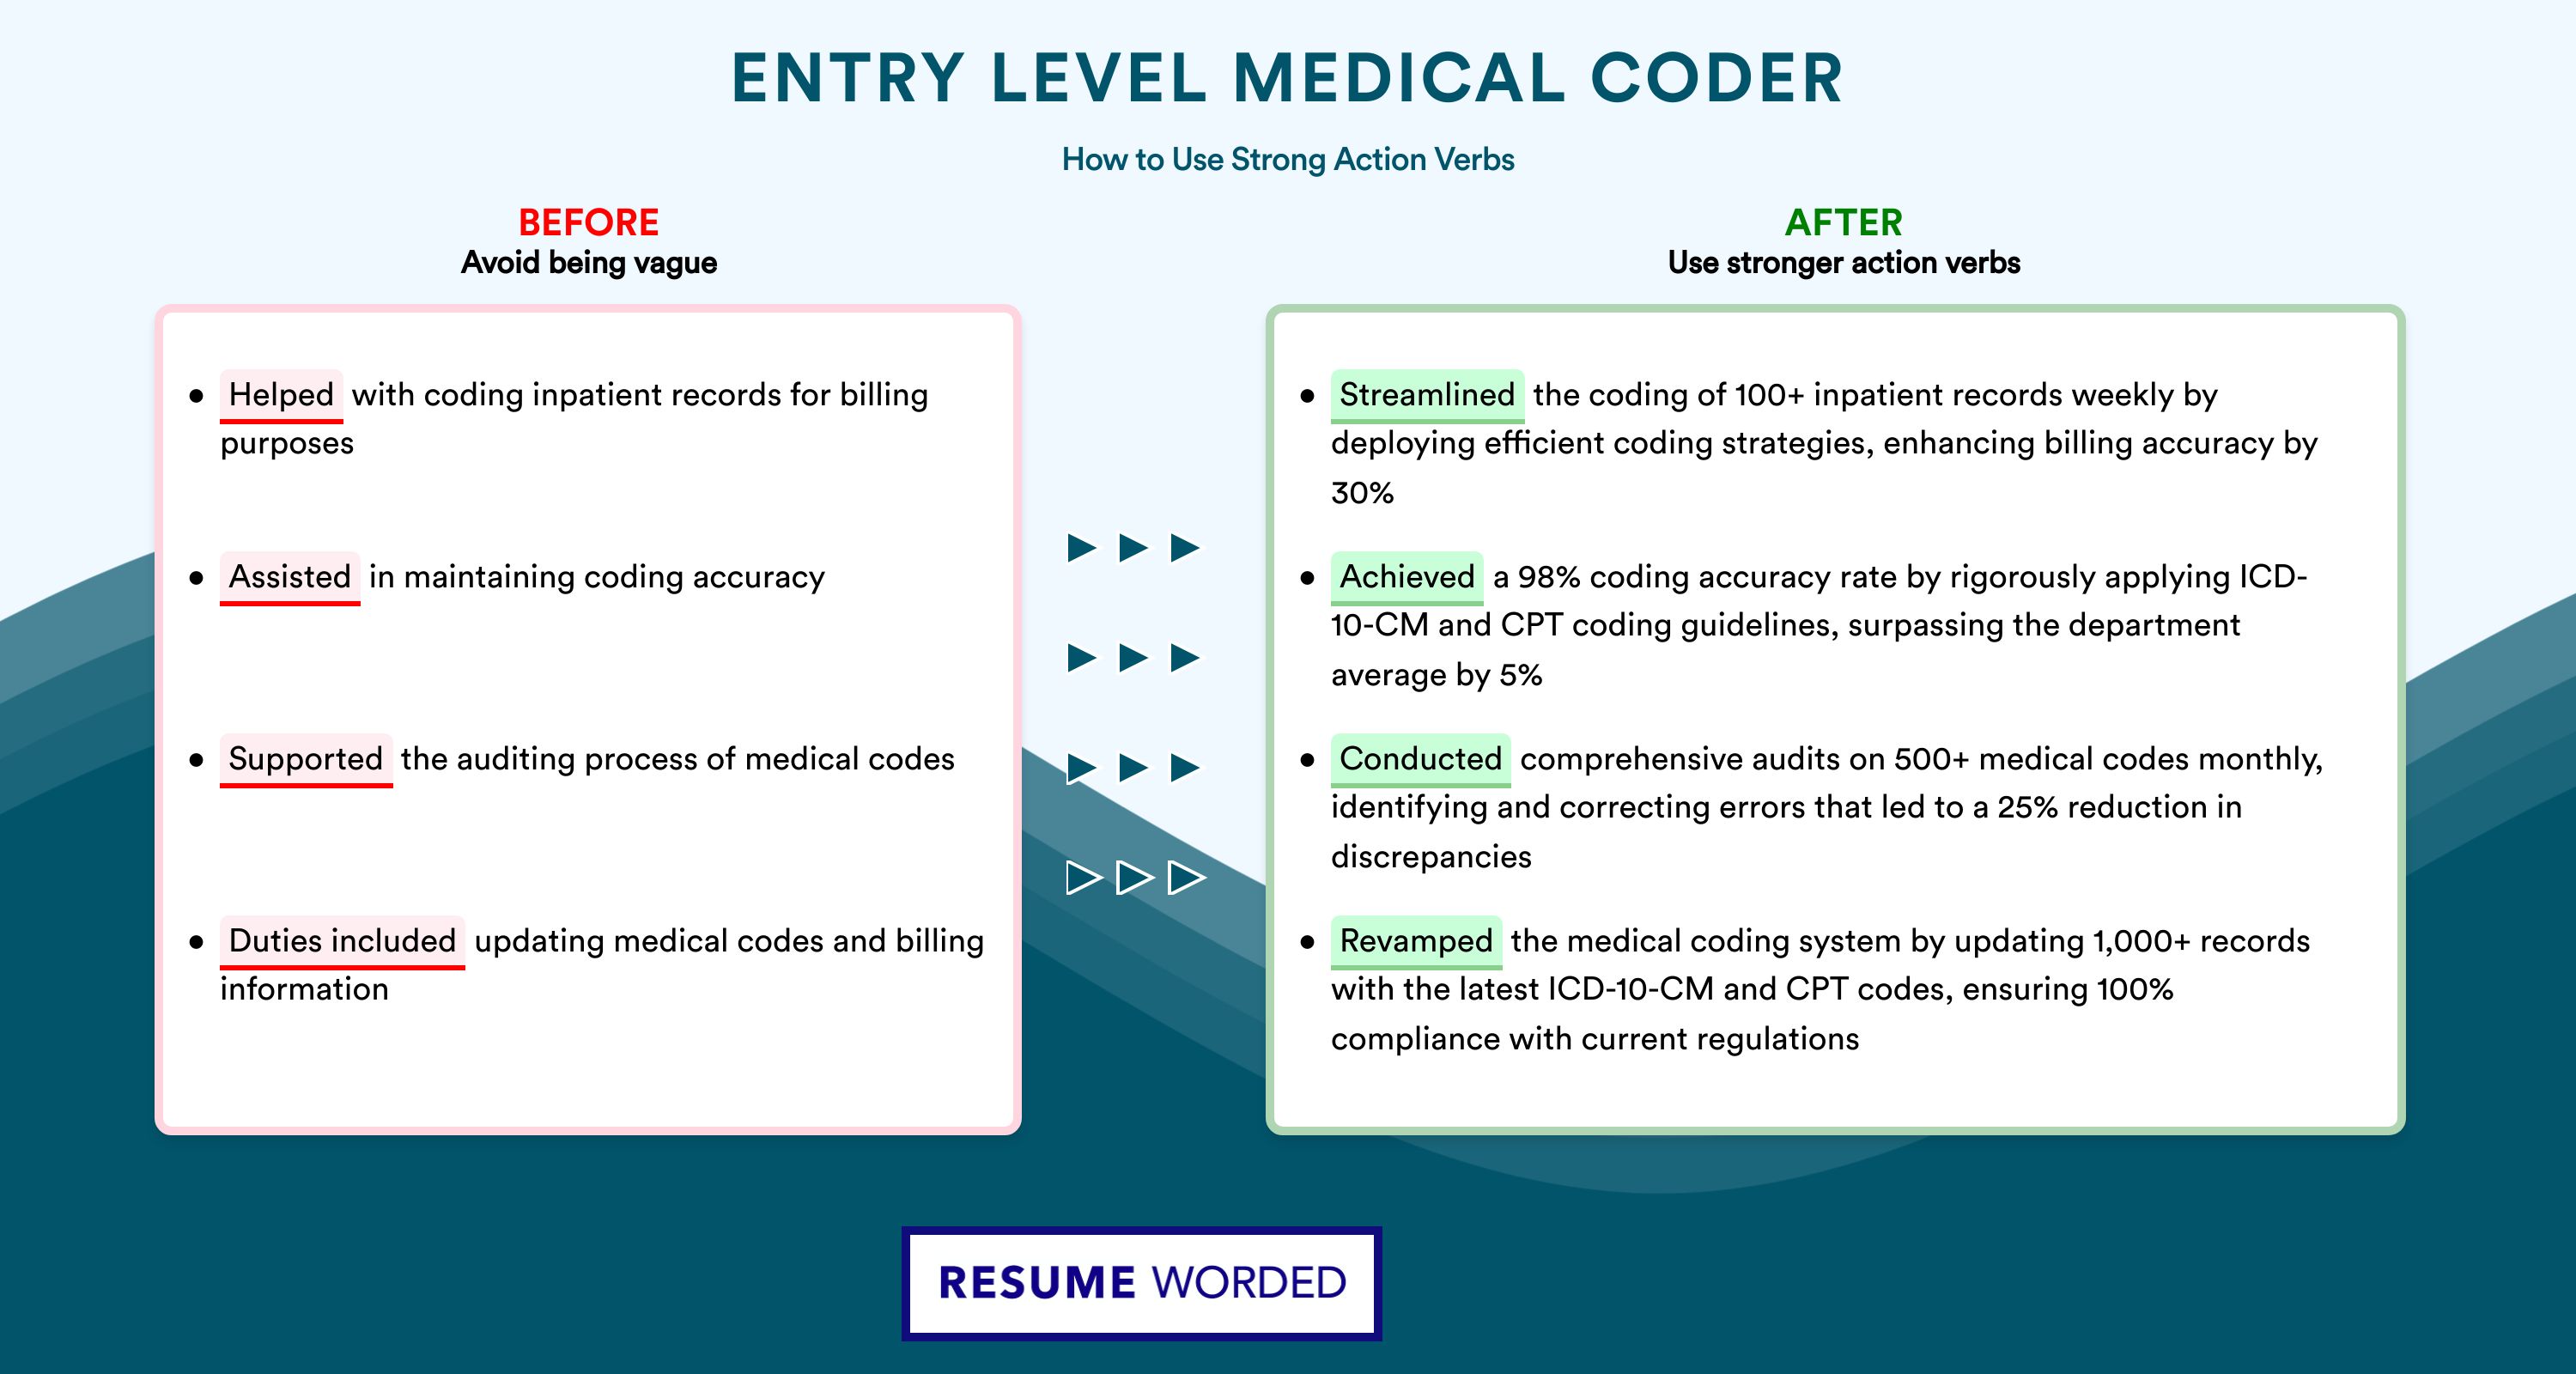 Action Verbs for Entry Level Medical Coder